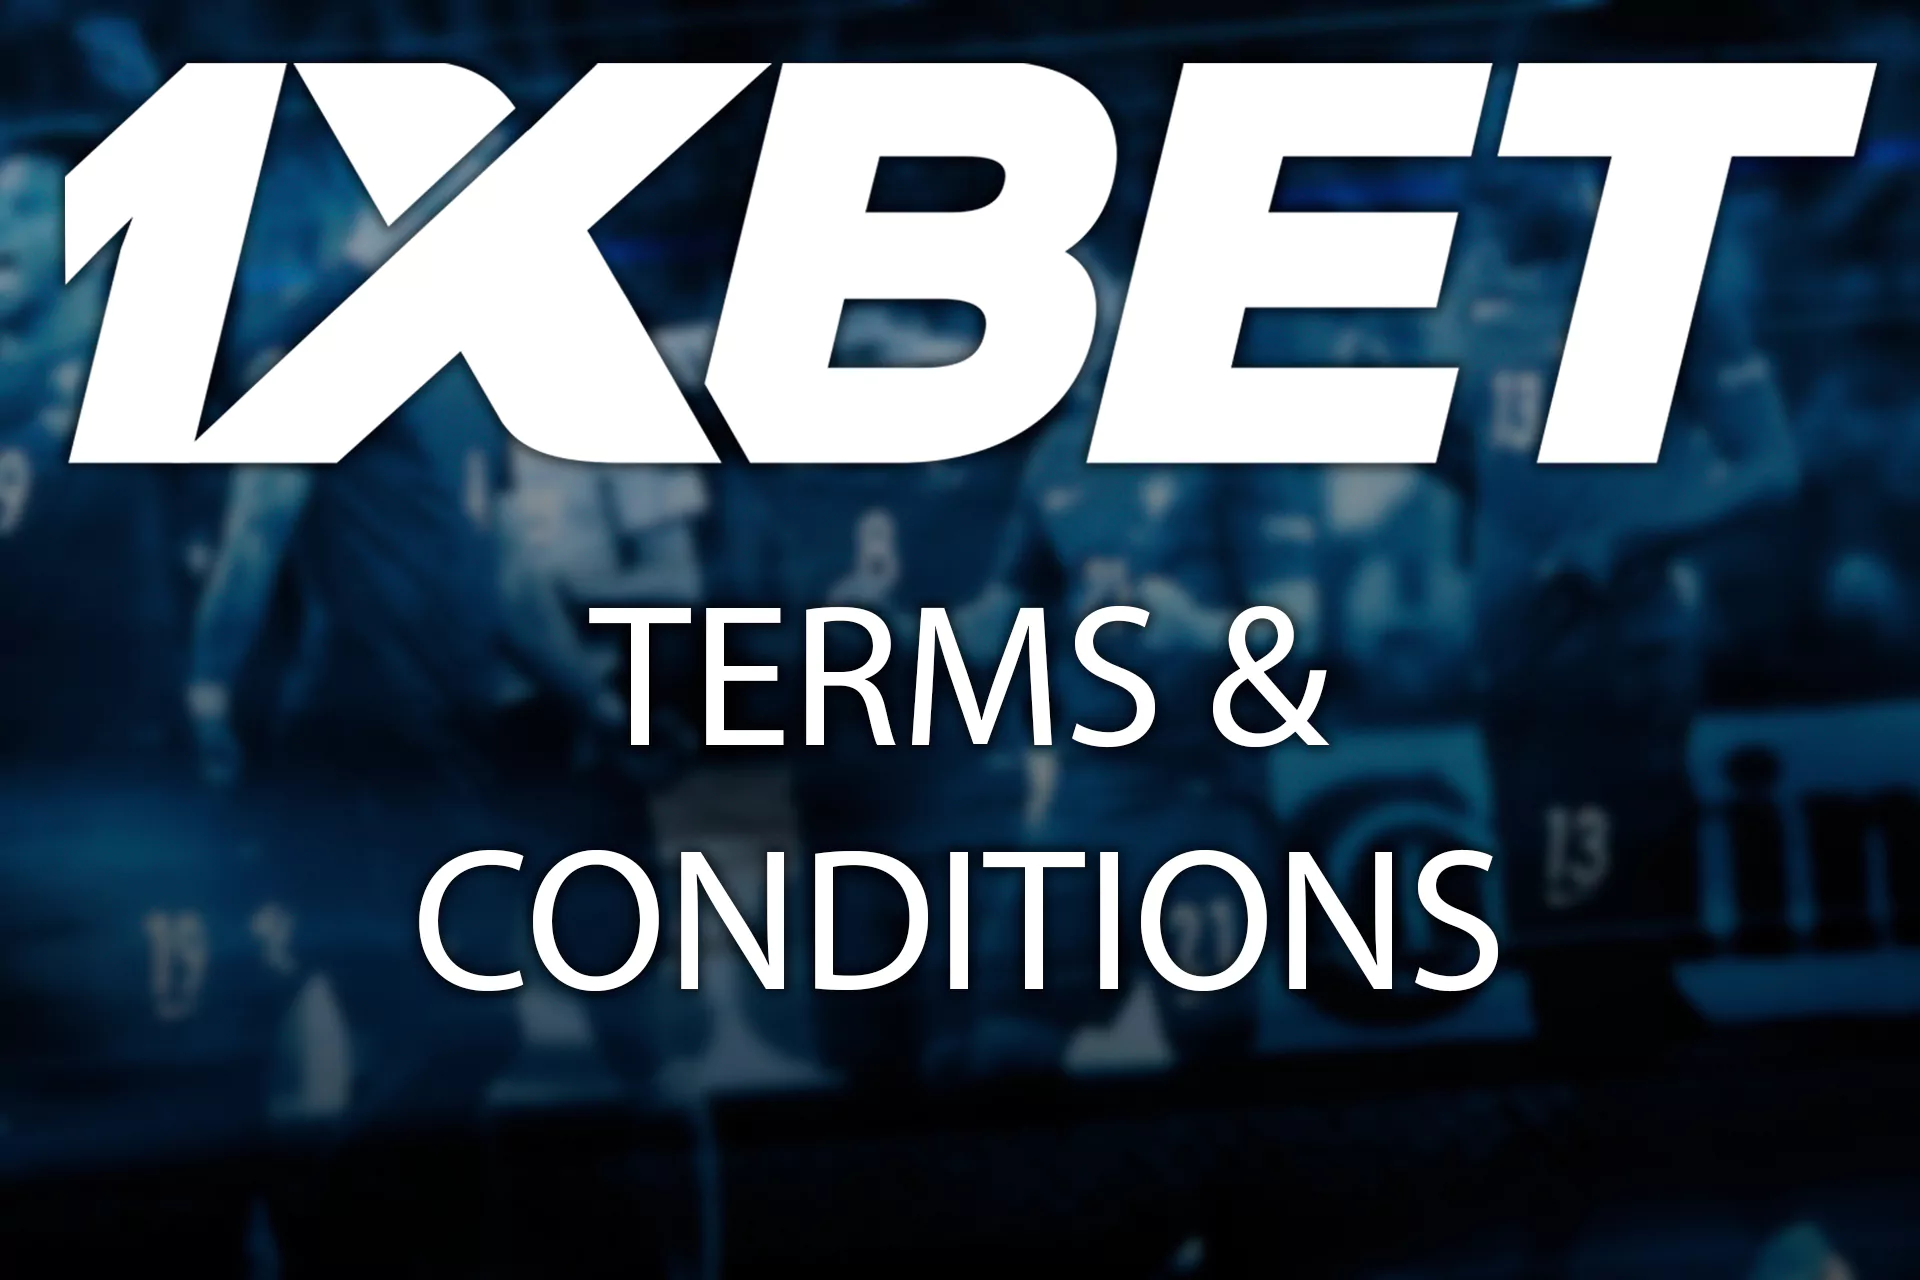 To get the 1xBet Friday bonus, meet a number of conditions.